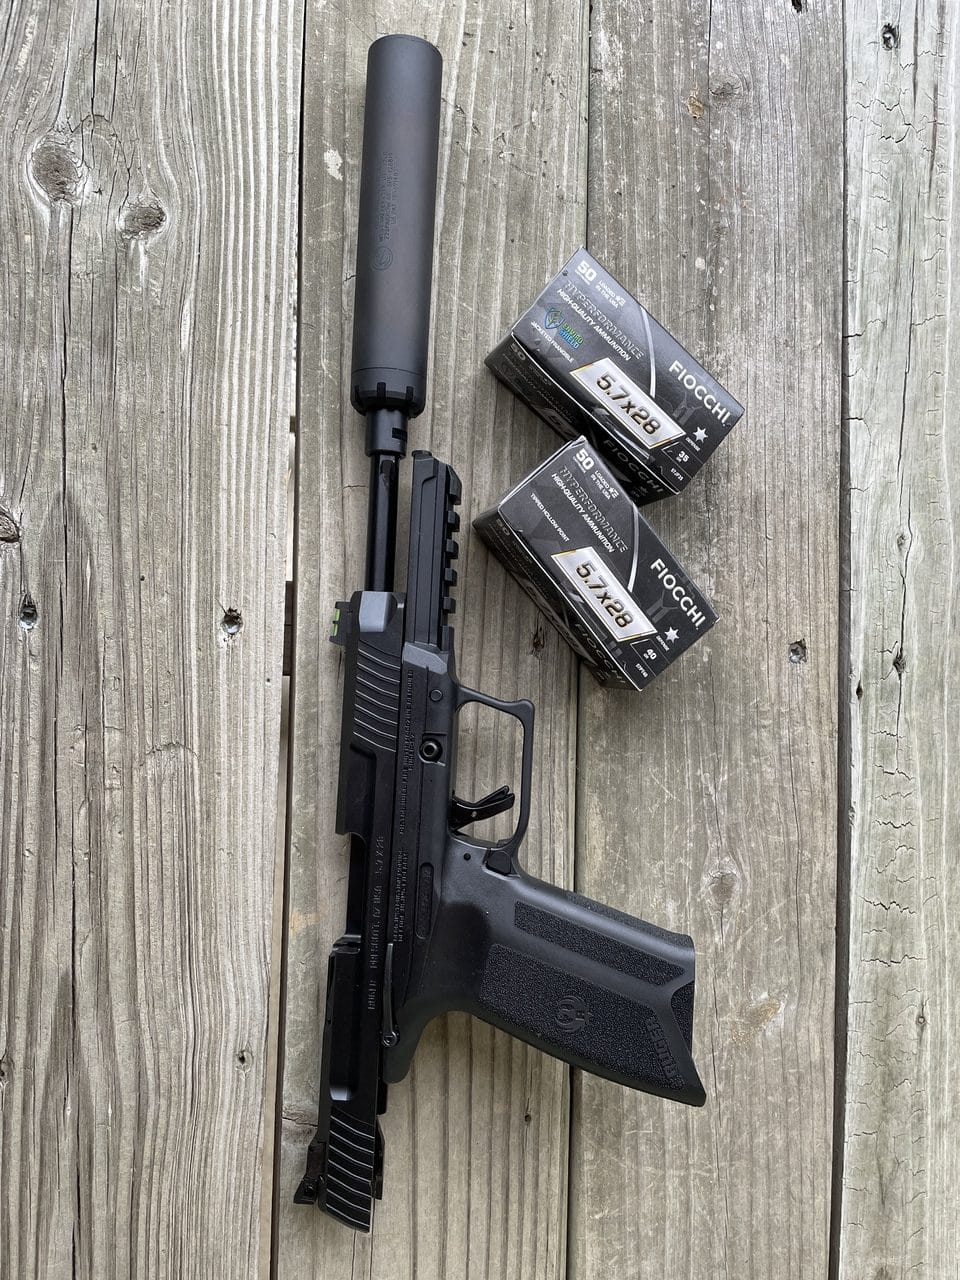 Ruger-57 on bench with ammo and silencer